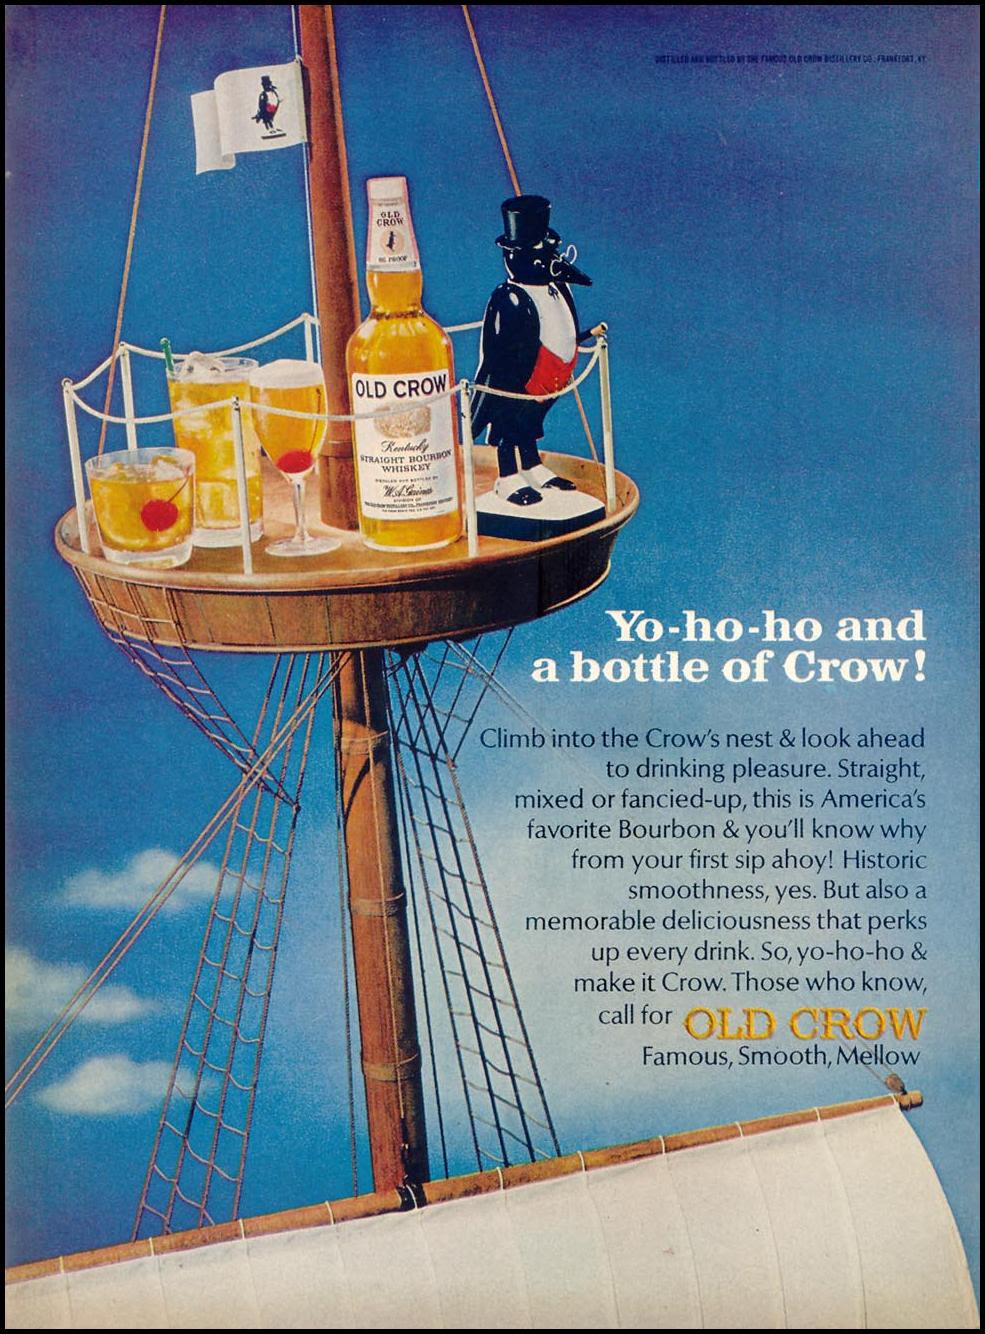 THE OLD CROW BOURBON WHISKEY
TIME
03/11/1966
p. 92